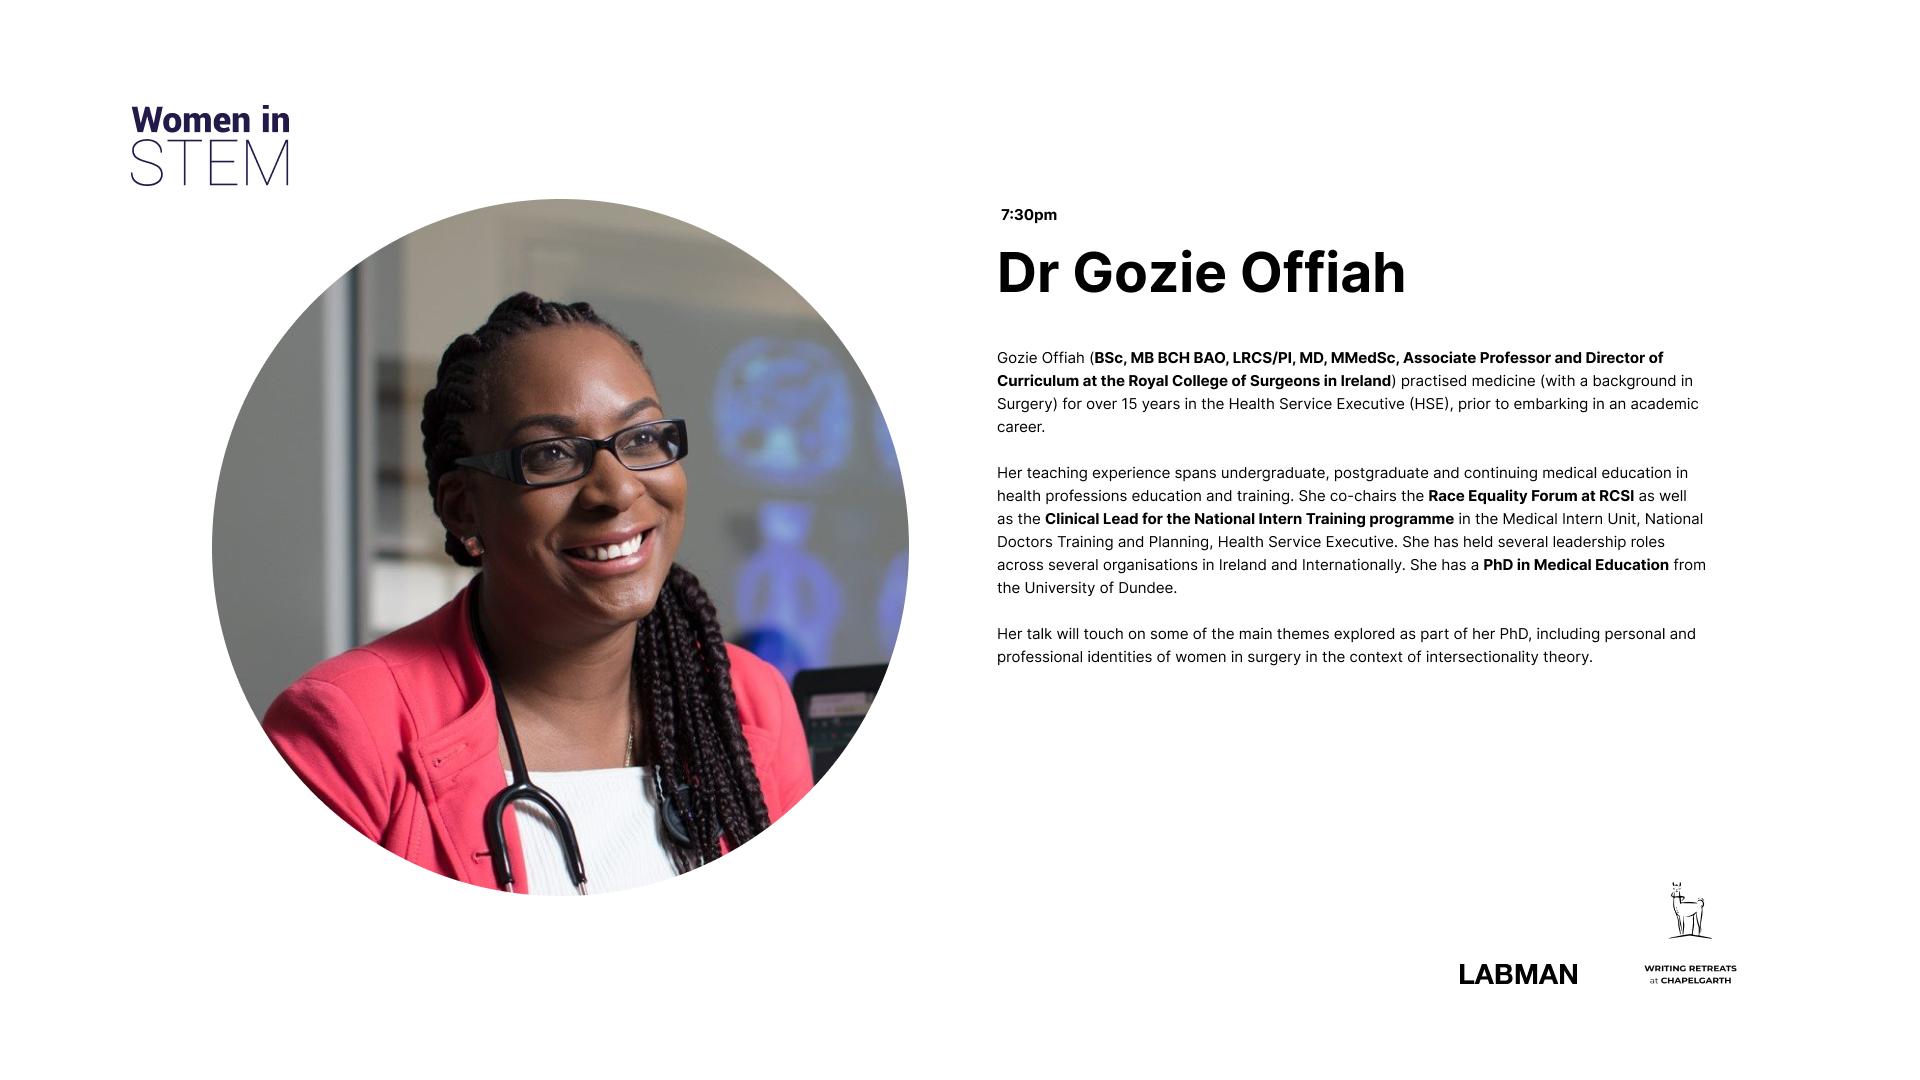 Dr Gozie Offiah will be speaking at Labman's Science Cabaret